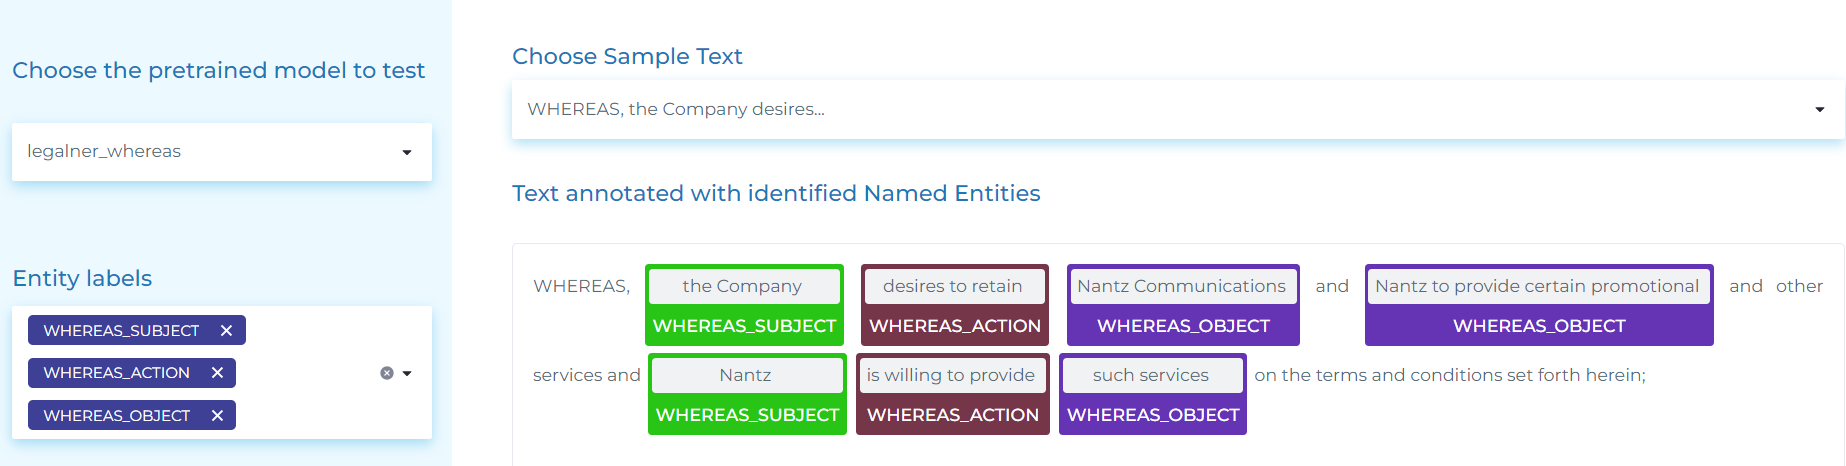 Detecting Whereas clauses and extracting entities